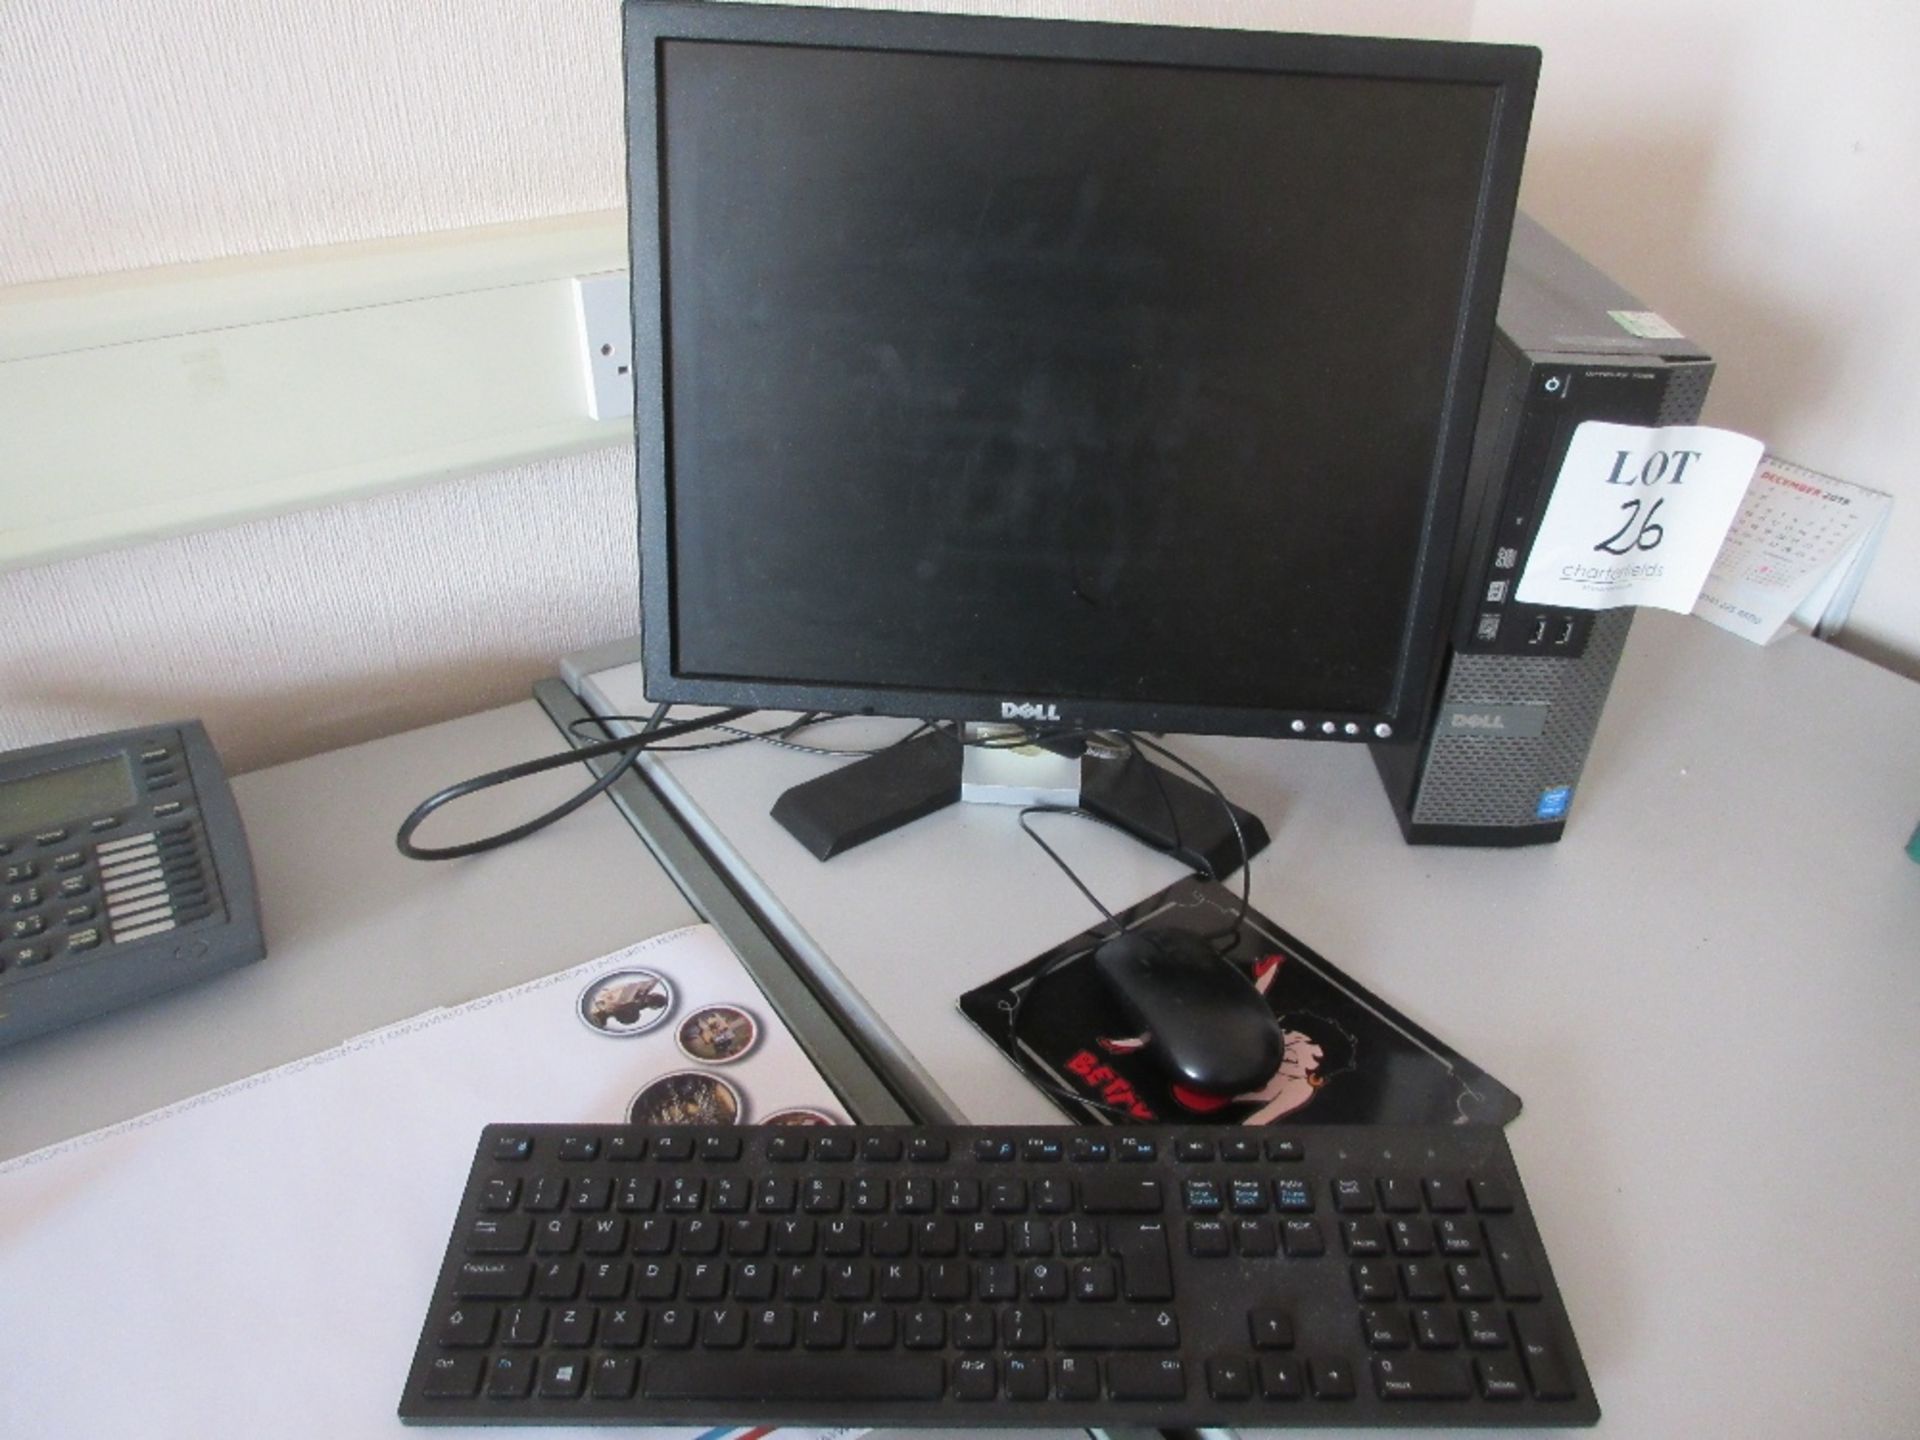 Dell OptiPlex 7020 mini tower PC with flat screen monitor, keyboard and mouse incorporating i5-4590